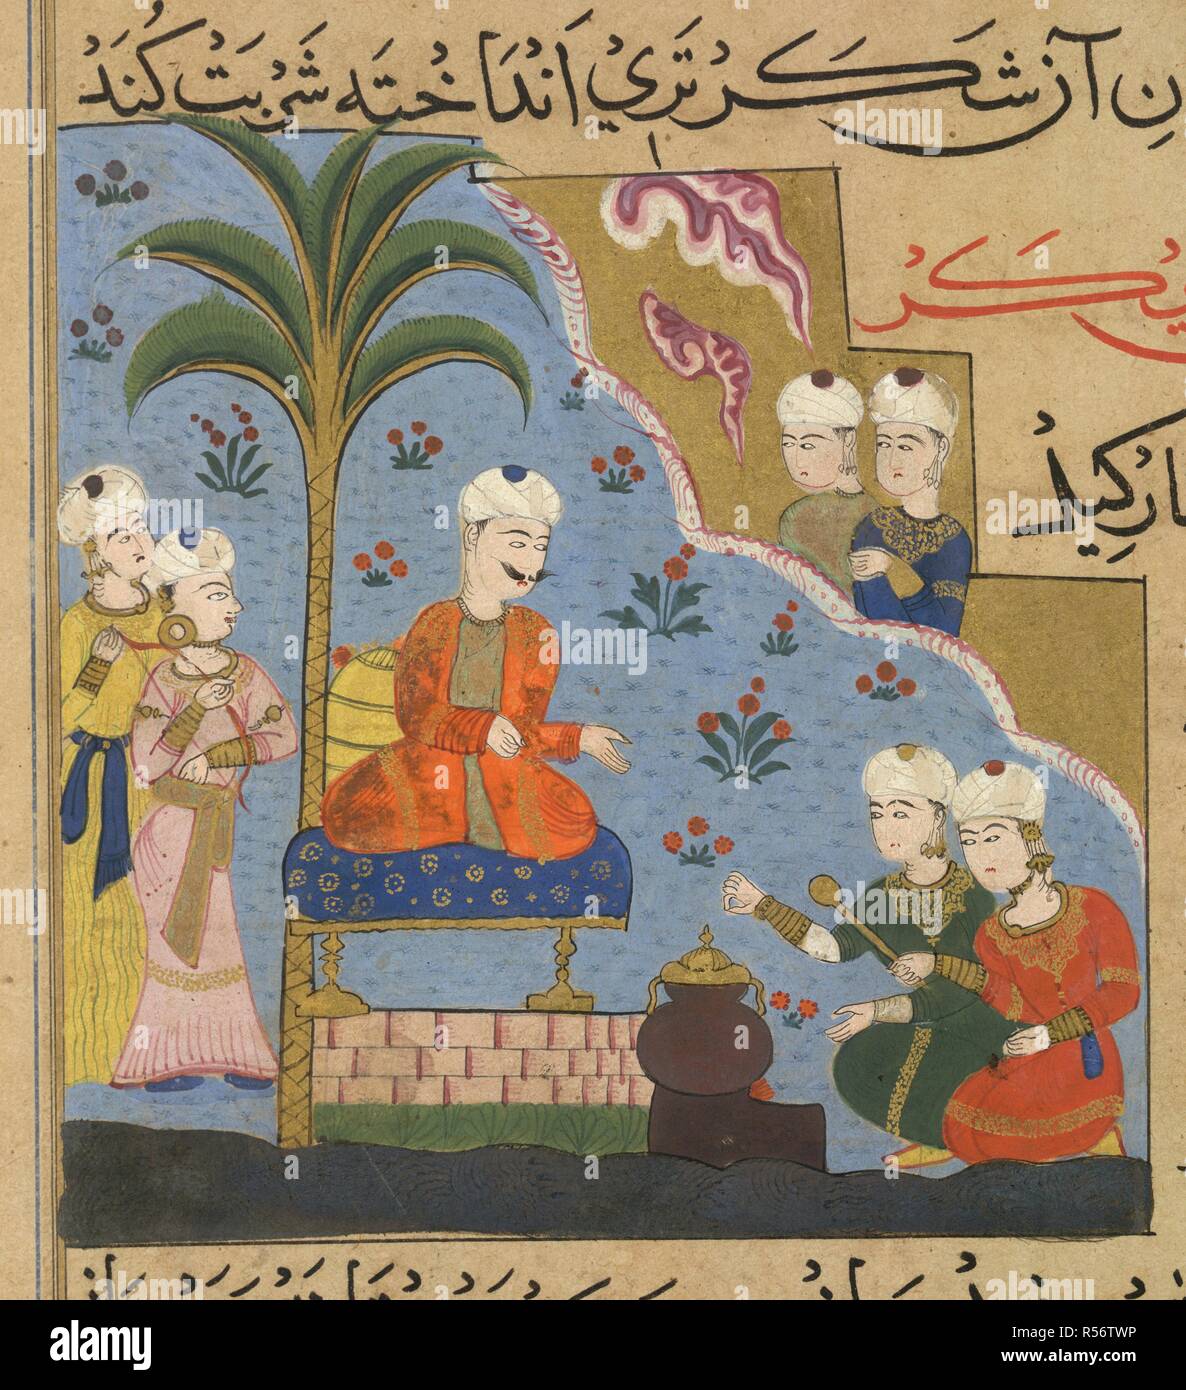 Preparation of sherbet. The Ni'matnama-i Nasir al-Din Shah. A manuscript o. 1495 - 1505. Preparation of sherbet for the Sultan Ghiyath al-Din. Opaque watercolour. Sultanate style.  Image taken from The Ni'matnama-i Nasir al-Din Shah. A manuscript on Indian cookery and the preparation of sweetmeats, spices etc.  Originally published/produced in 1495 - 1505. . Source: I.O. ISLAMIC 149, f.66. Language: Persian. Stock Photo